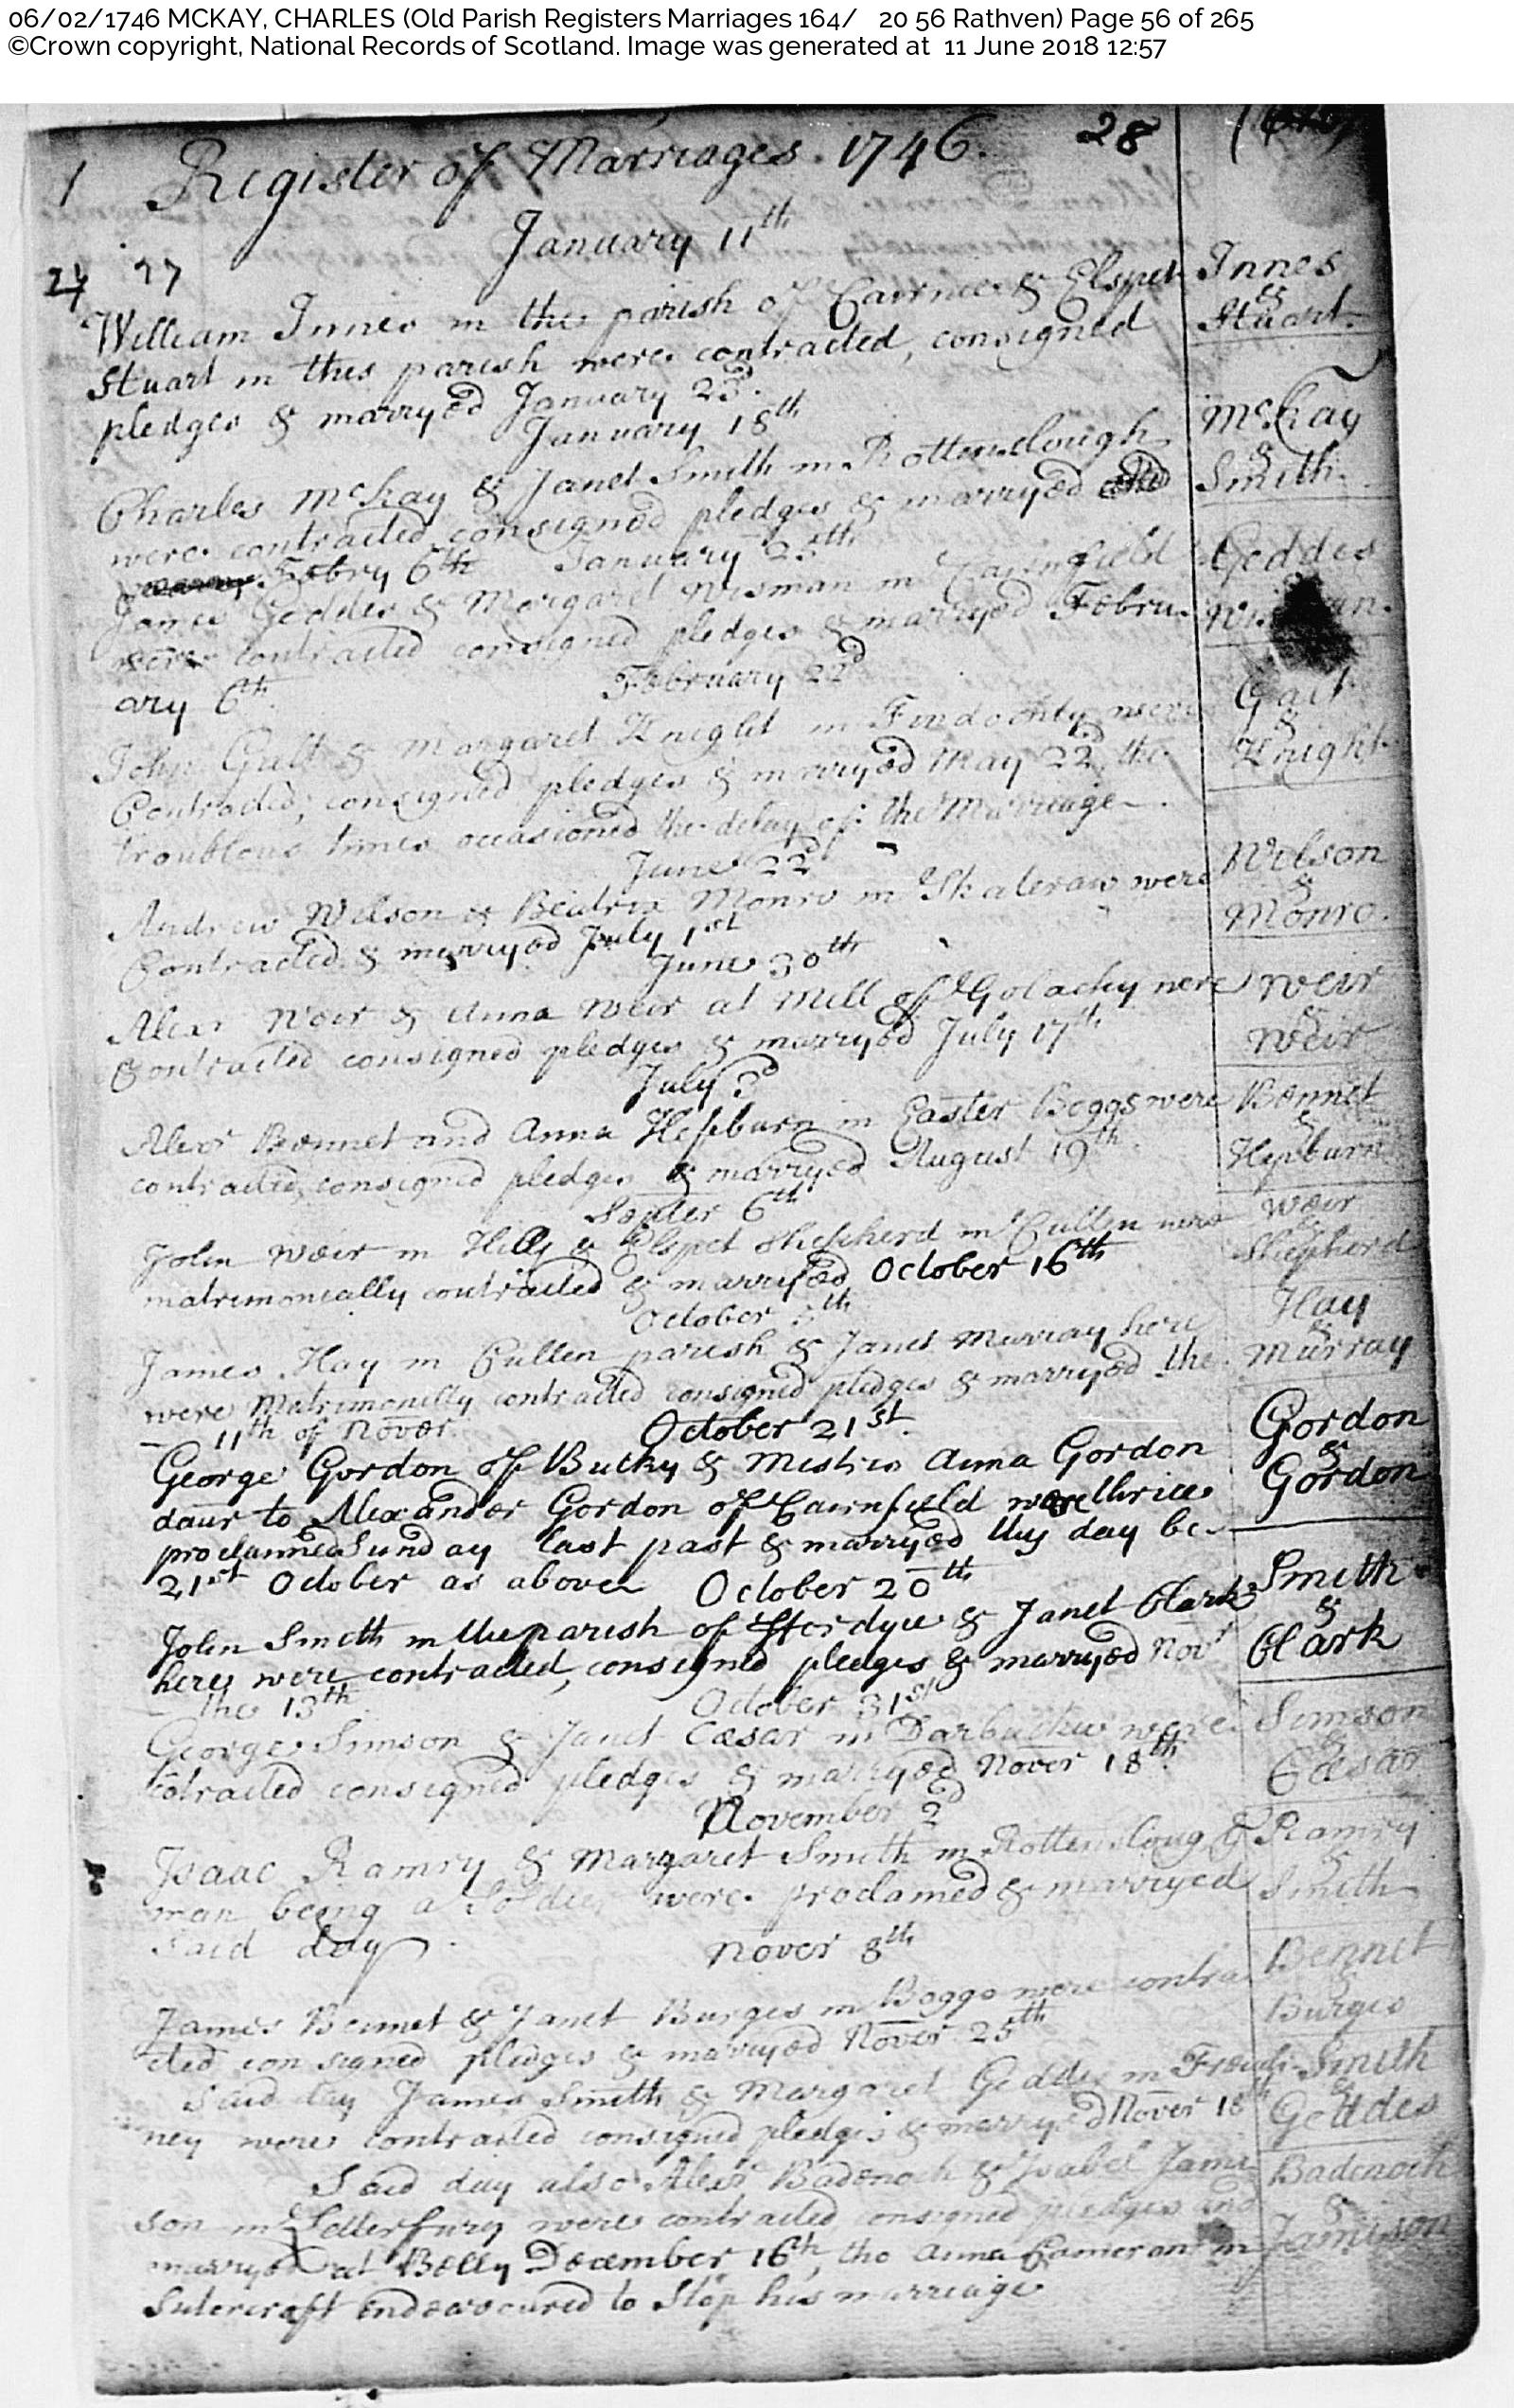 Charles McKay & Janet Smith M 06-02-1746 ScotlandsPeople, February 2, 1746, Linked To: <a href='i199.html' >Charles McKay</a>